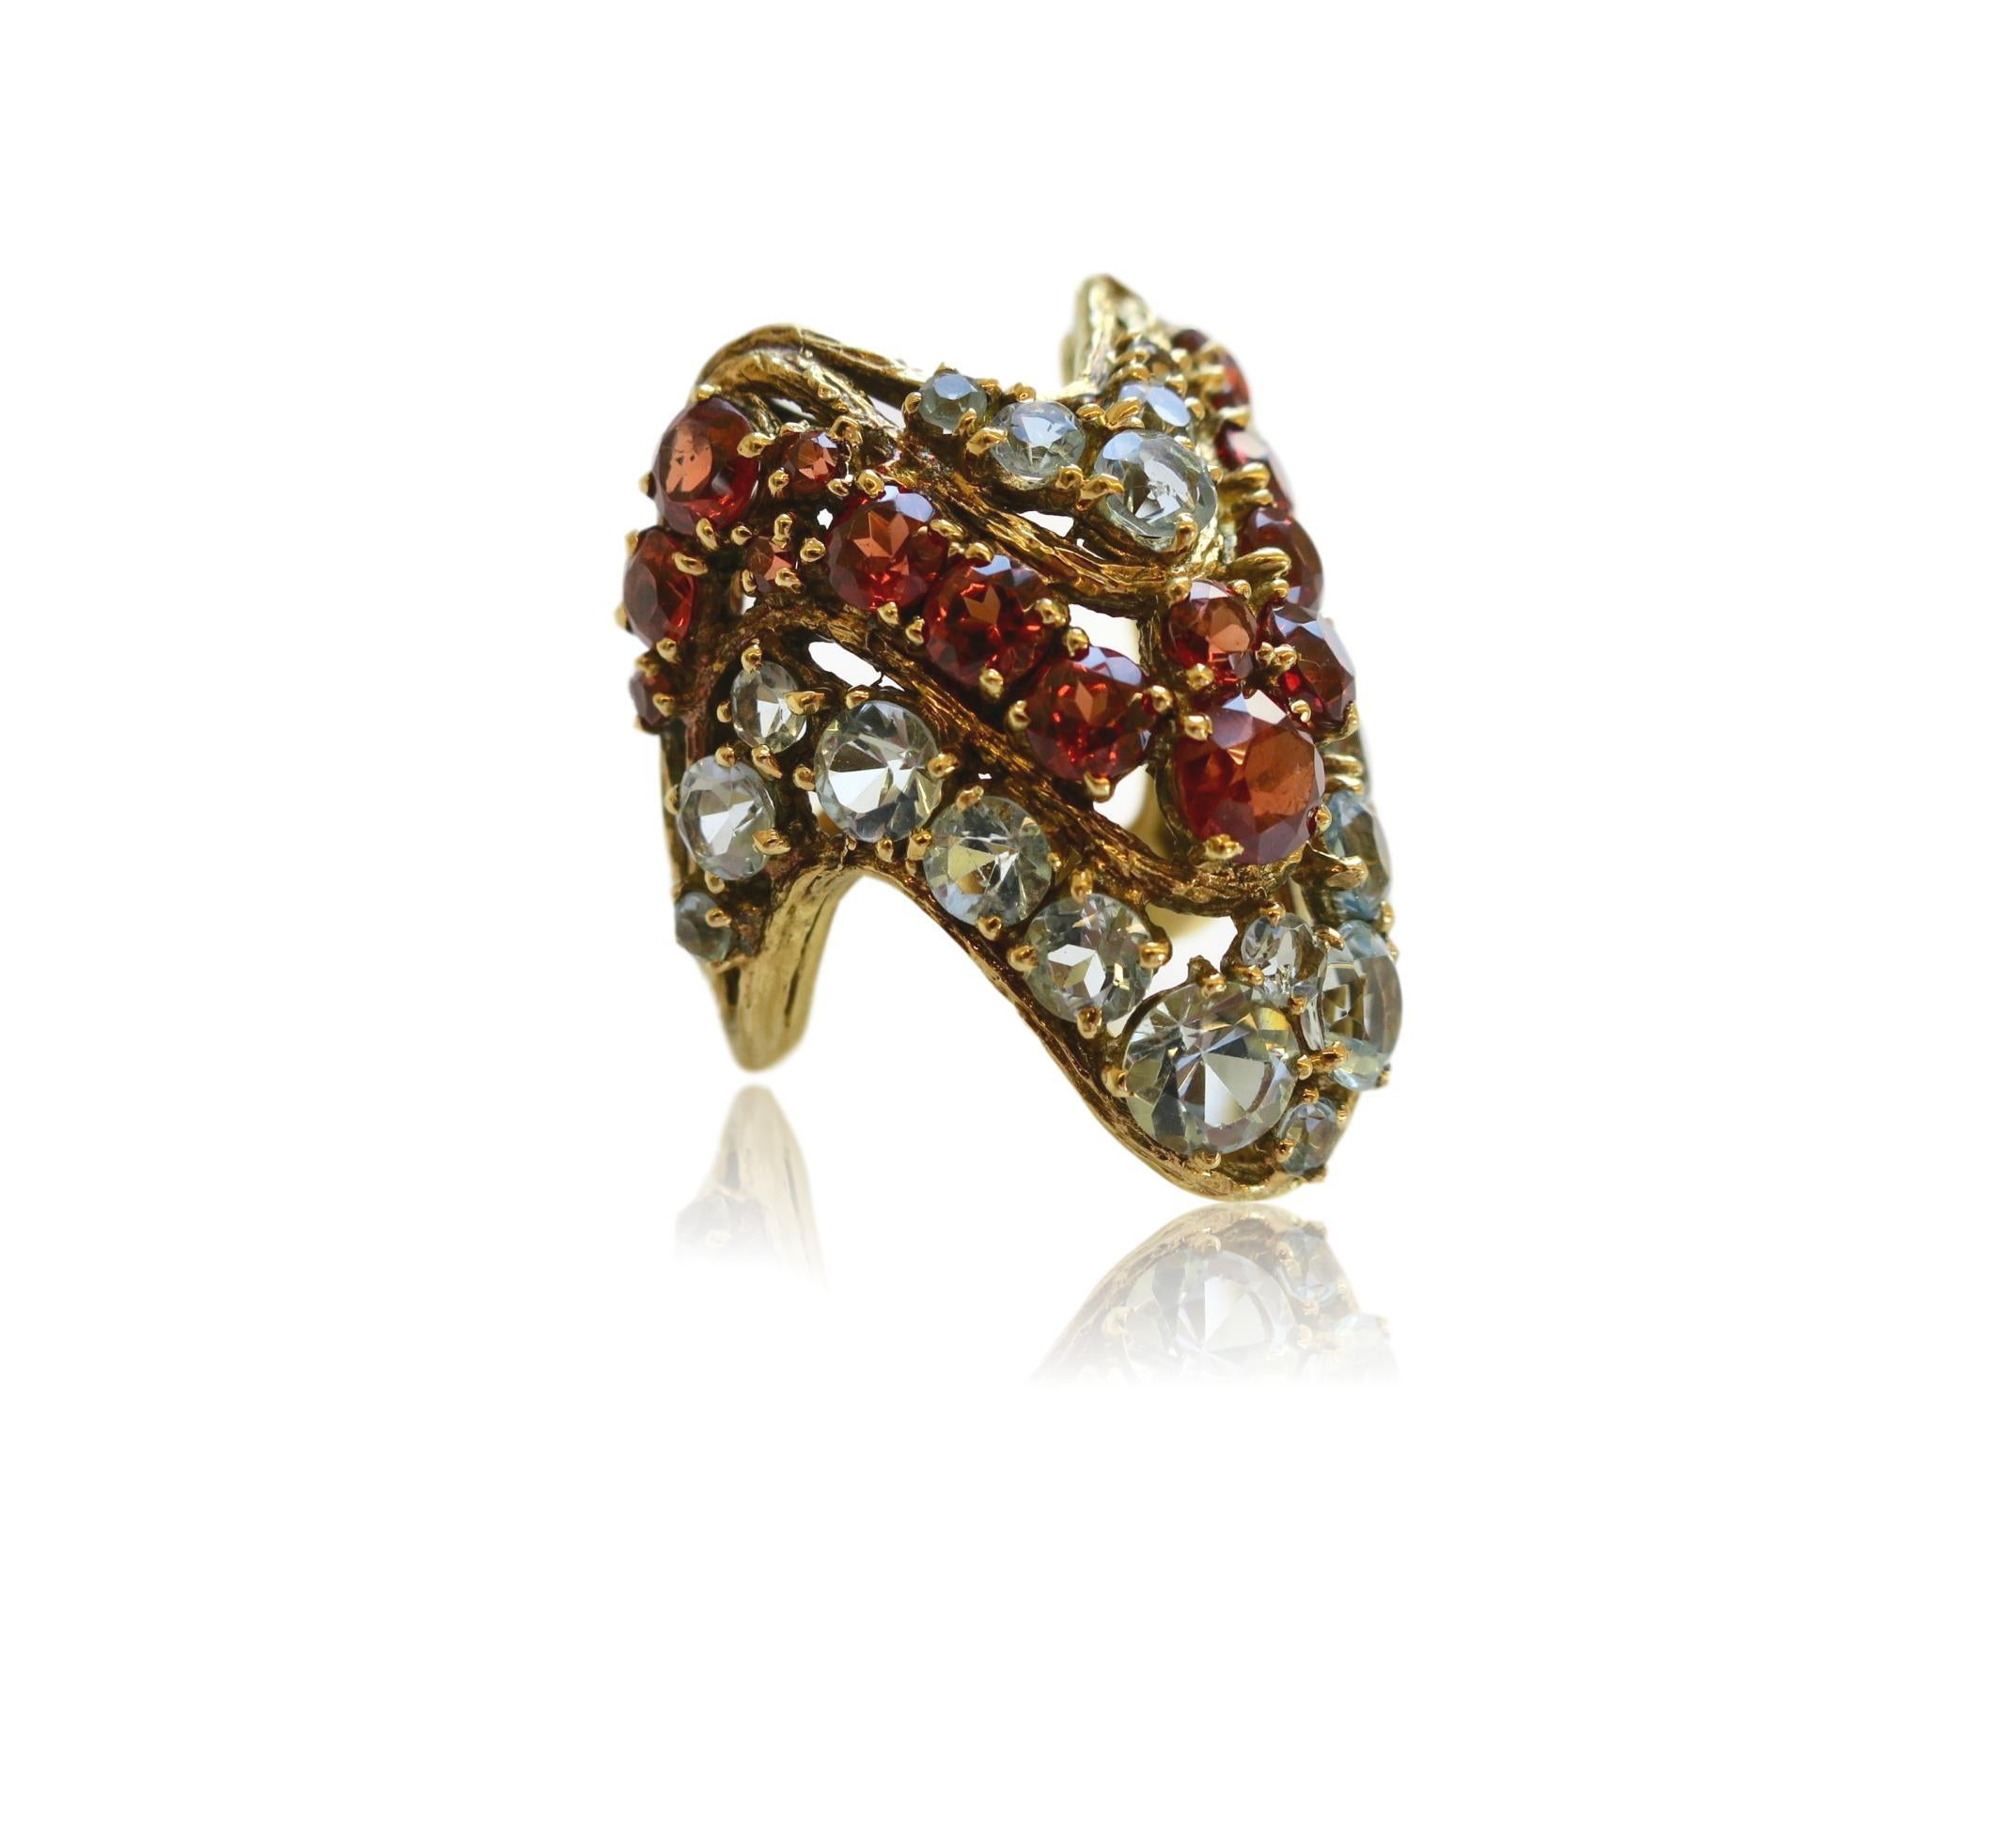 Anglo-Indian H. Stern Aquamarine and Hessonite Garnet Cocktail Ring, 1970s